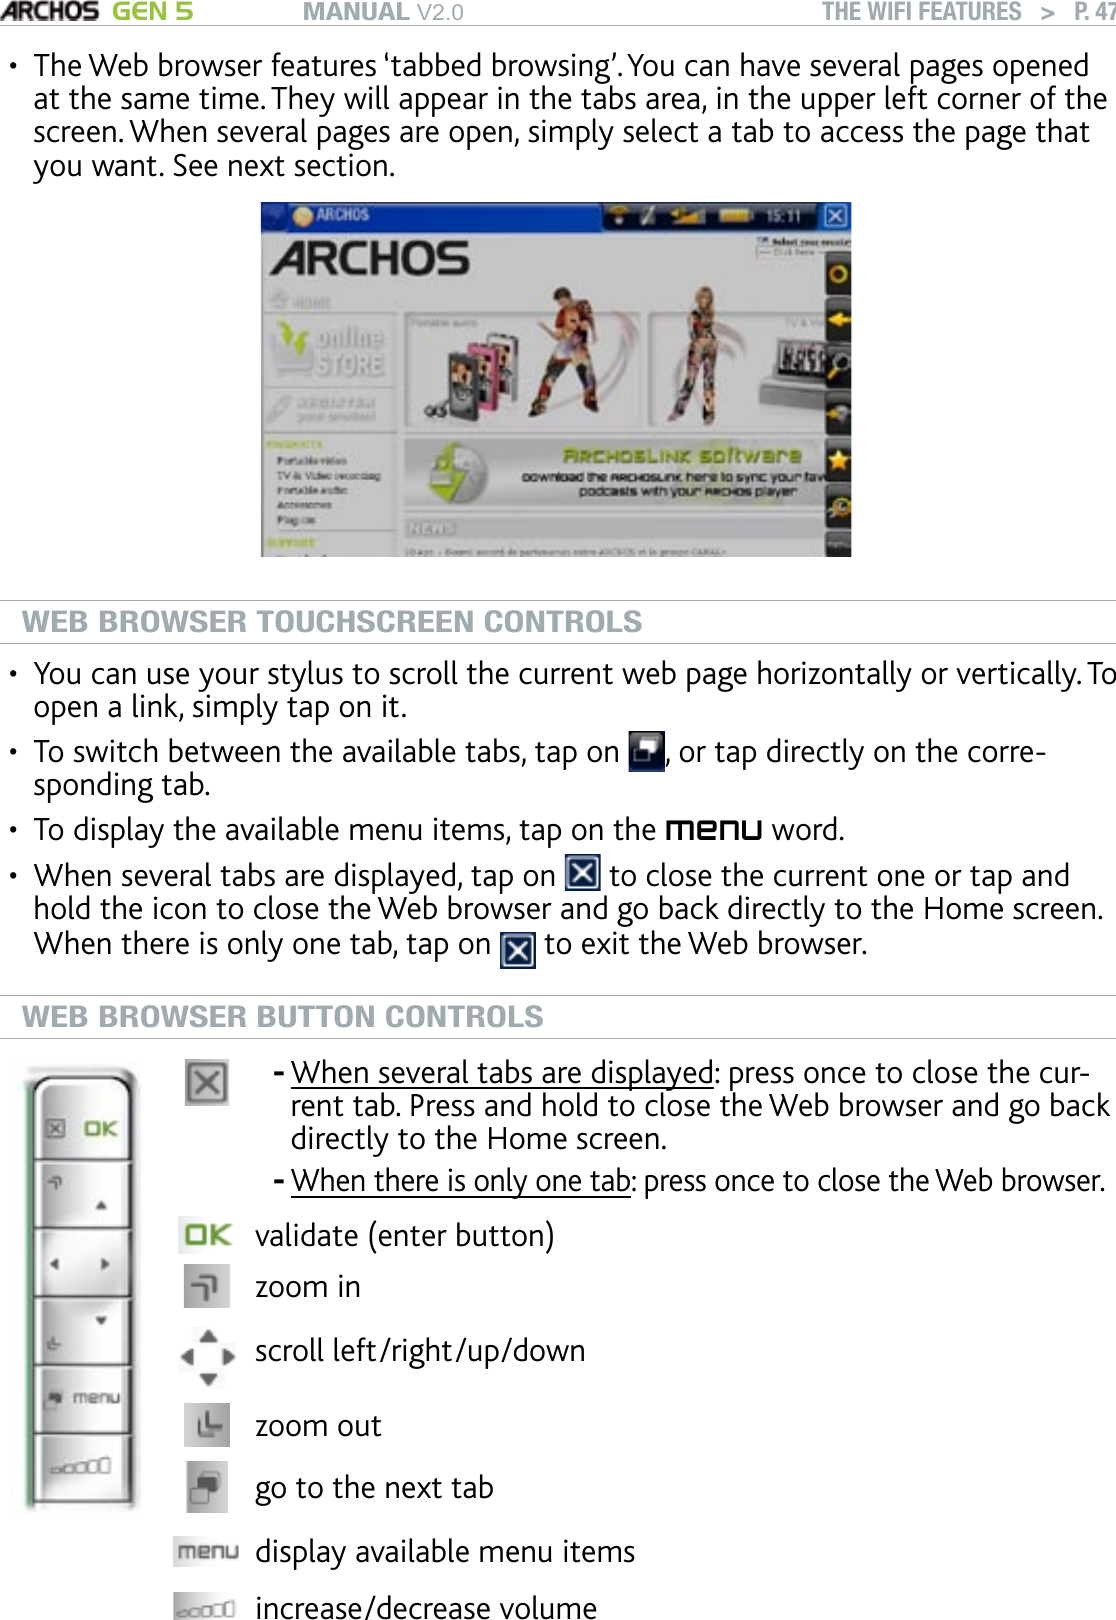 MANUAL V2.0 GEN 5 THE WIFI FEATURES   &gt;   P. 47The Web browser features ‘tabbed browsing’. You can have several pages opened at the same time. They will appear in the tabs area, in the upper left corner of the screen. When several pages are open, simply select a tab to access the page that you want. See next section.WEB BROWSER TOUCHSCREEN CONTROLSYou can use your stylus to scroll the current web page horizontally or vertically. To open a link, simply tap on it.To switch between the available tabs, tap on  , or tap directly on the corre-sponding tab.To display the available menu items, tap on the menu word.When several tabs are displayed, tap on   to close the current one or tap and hold the icon to close the Web browser and go back directly to the Home screen. When there is only one tab, tap on   to exit the Web browser.WEB BROWSER BUTTON CONTROLSWhen several tabs are displayed: press once to close the cur-rent tab. Press and hold to close the Web browser and go back directly to the Home screen. When there is only one tab: press once to close the Web browser.--validate (enter button)zoom inscroll left/right/up/downzoom out go to the next tabdisplay available menu itemsincrease/decrease volume•••••